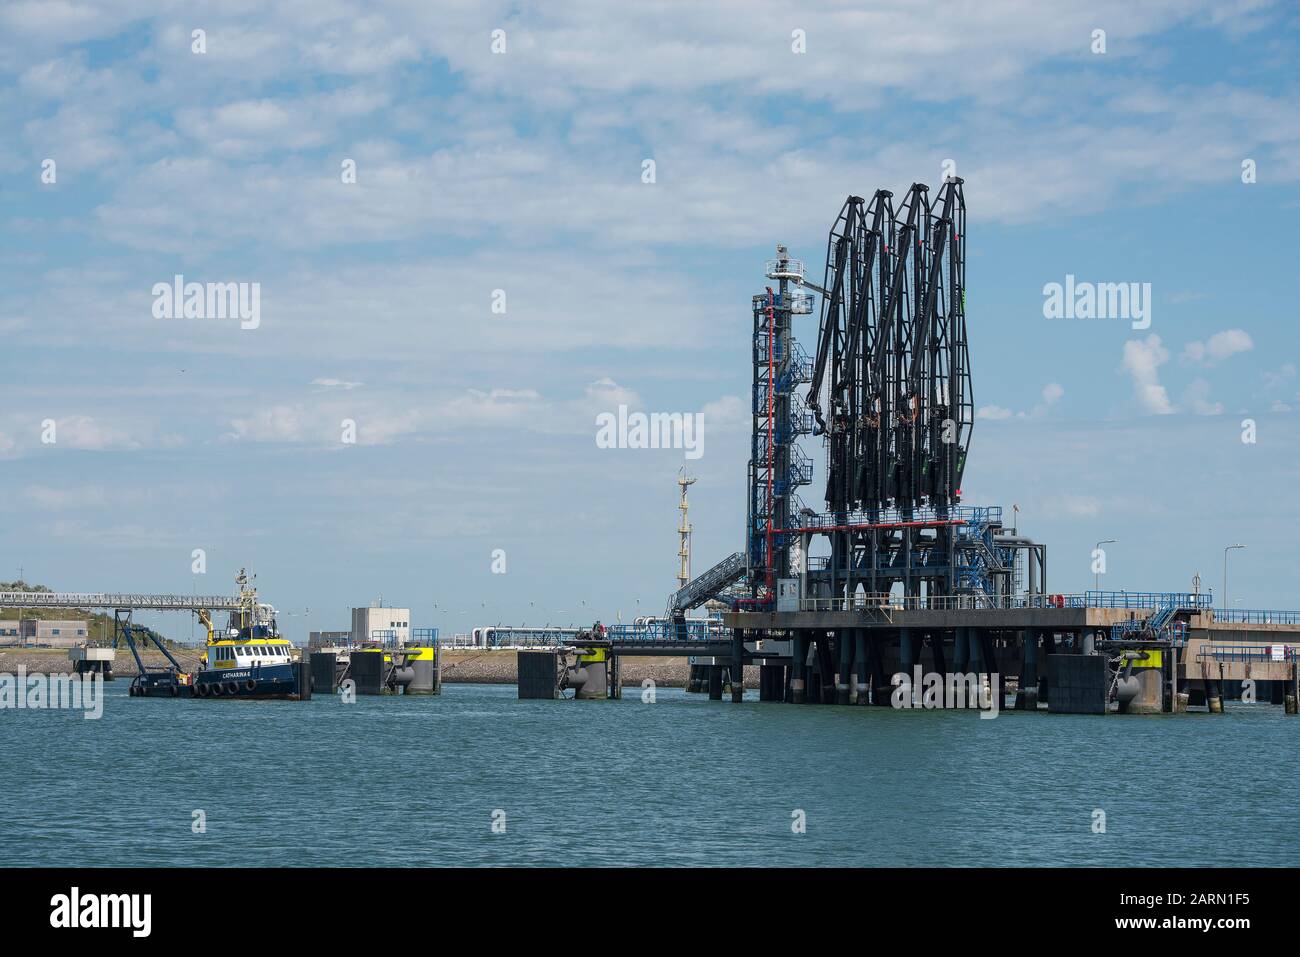 Rotterdam, Netherlands - July 30, 2019; Maasvlakte Oil Terminal one of the largest oil terminals in the world where oil tankers can load crude oil Stock Photo